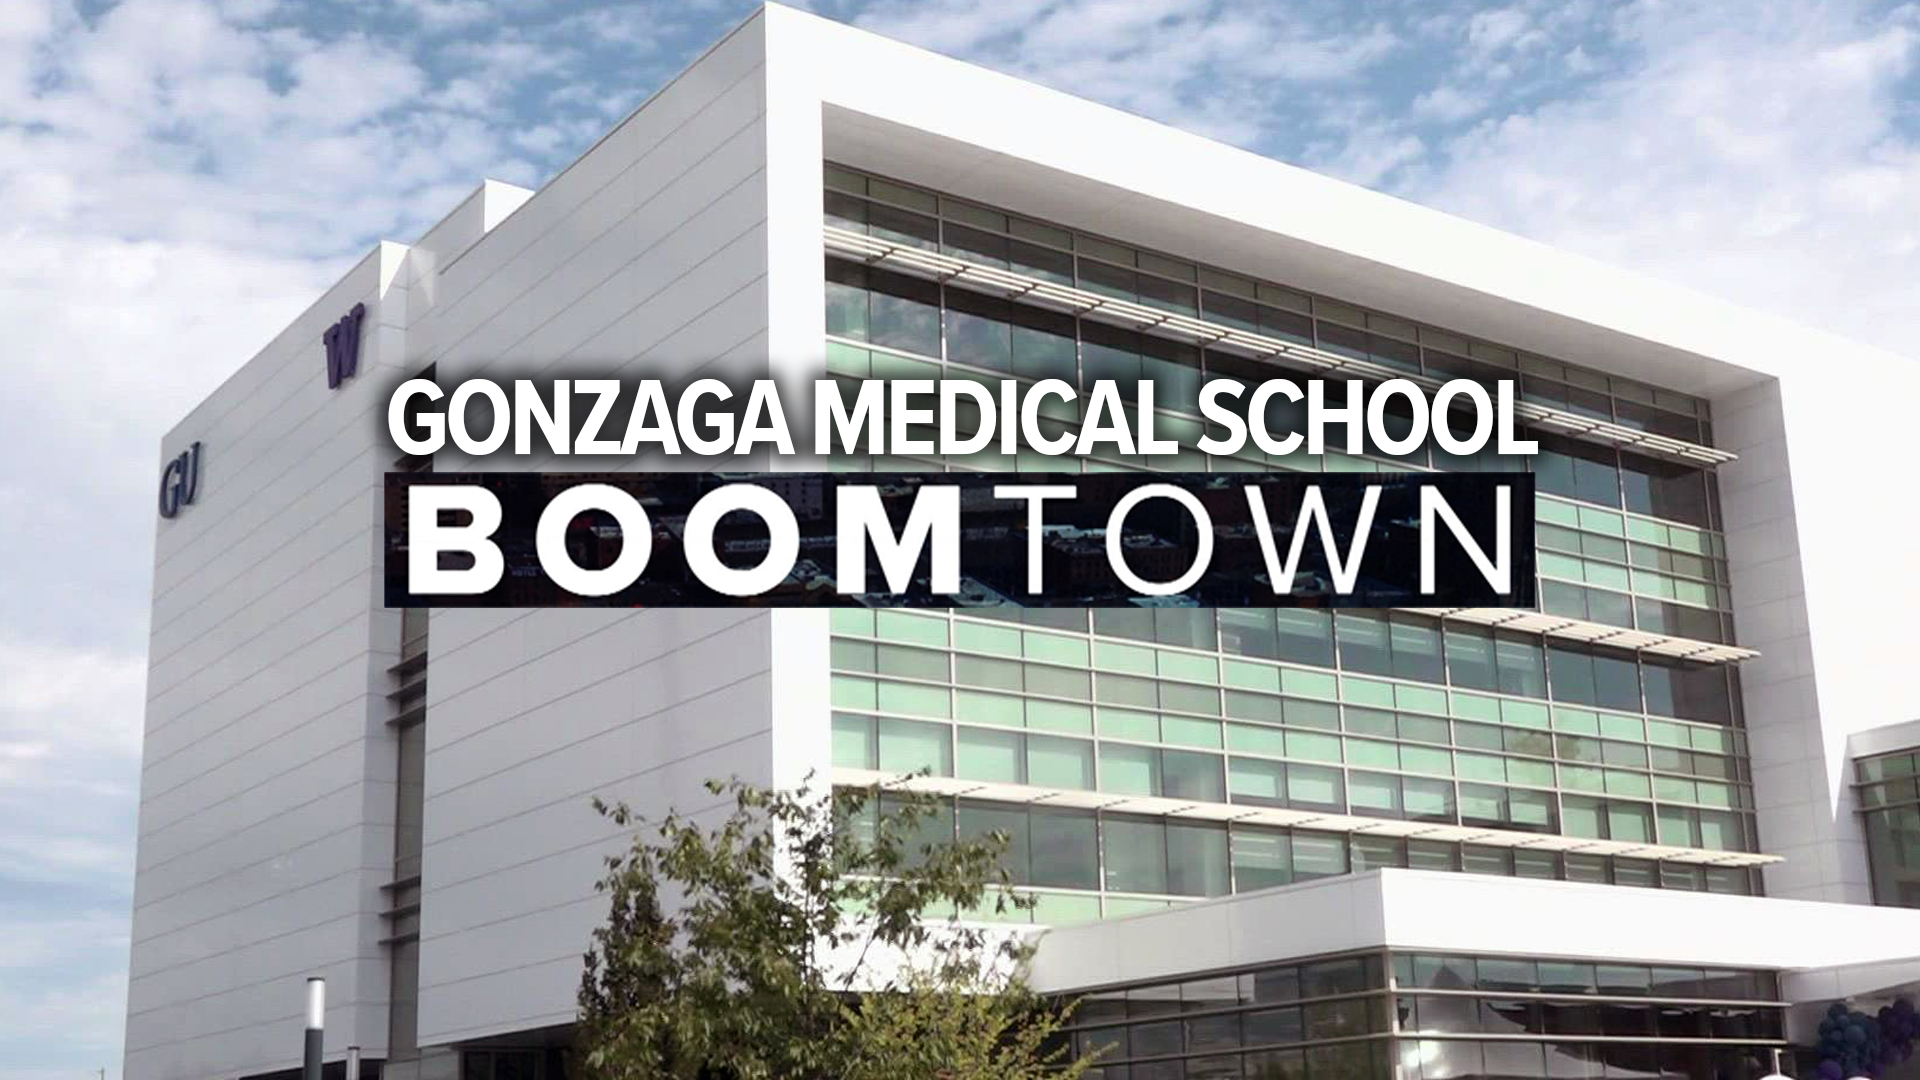 More than 300 students, faculty, and community leaders came together for the grand opening of the new Gonzaga medical school building.